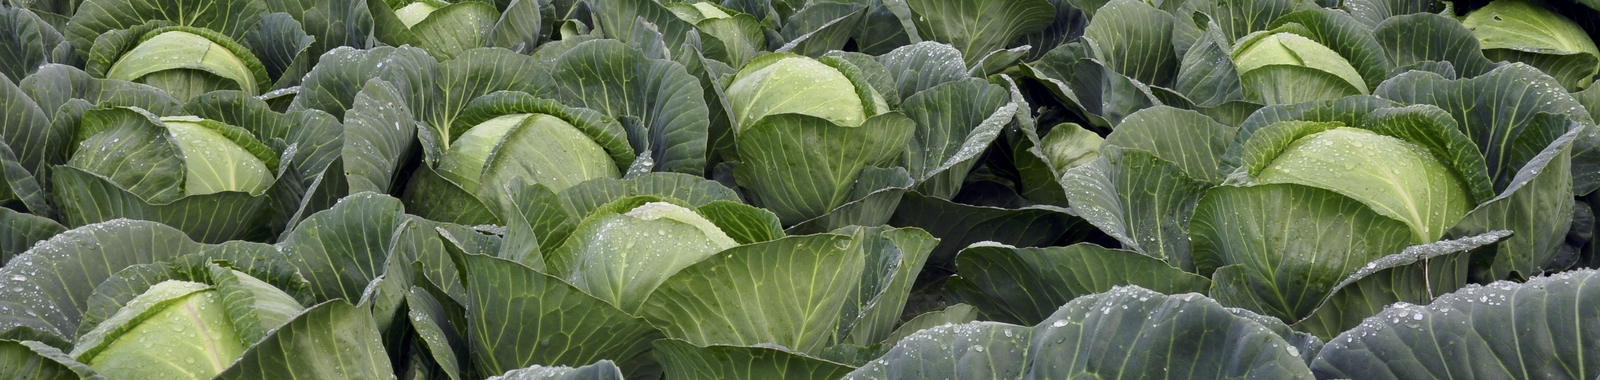 How to improve brassica nutritional health benefits